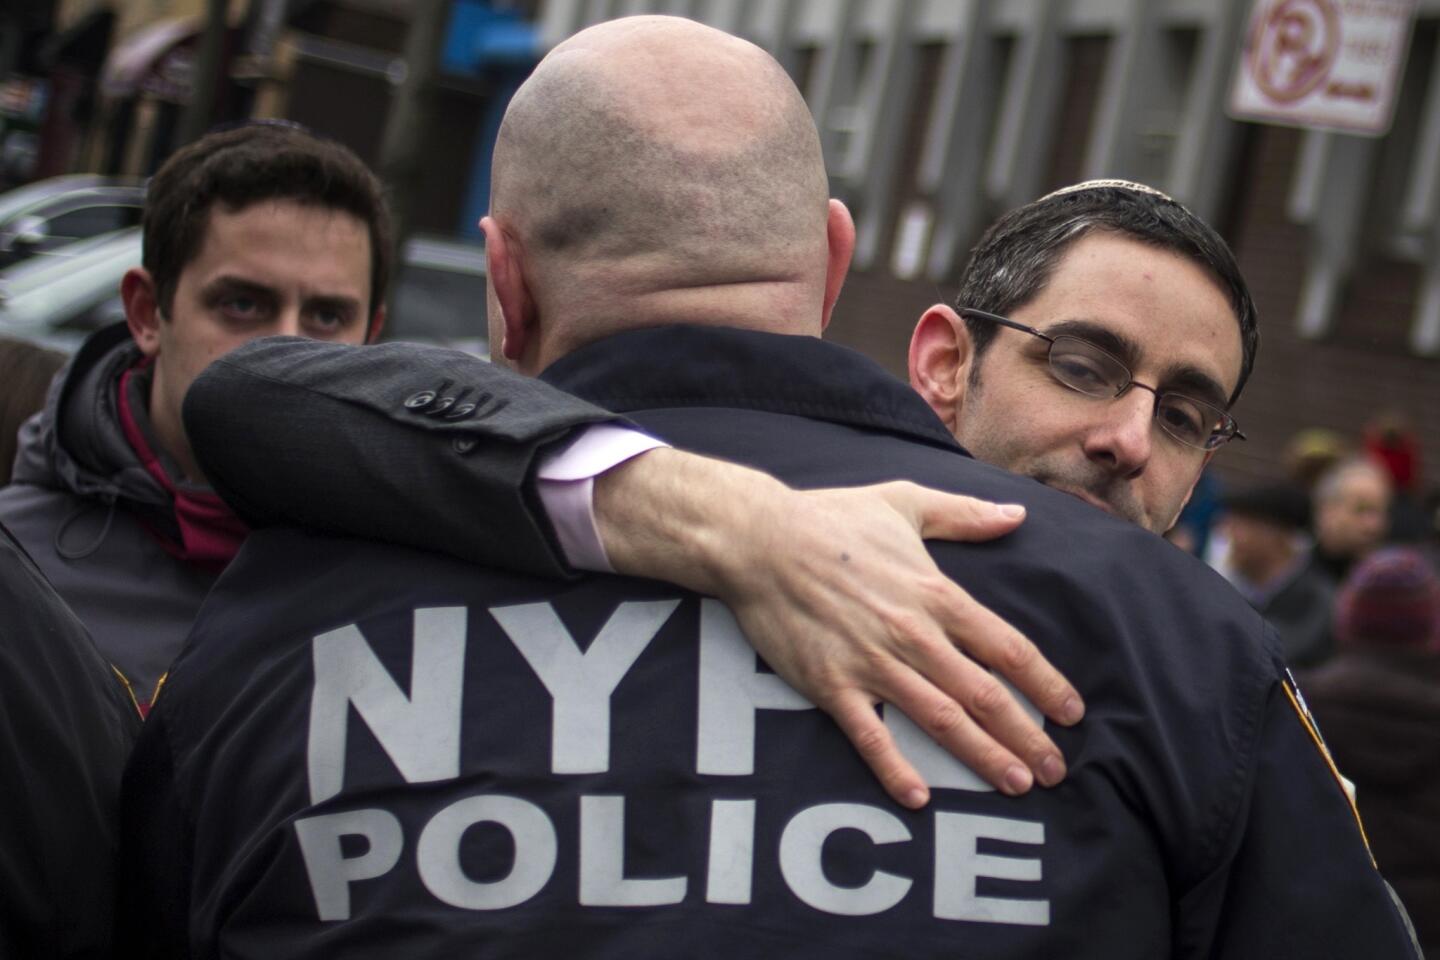 A man, who gathered with dozens to show support for policemen two days after officers Wenjian Liu and Rafael Ramos were shot and killed as they sat in a marked squad car in Brooklyn on Saturday, embraces a New York Police Department (NYPD) officer